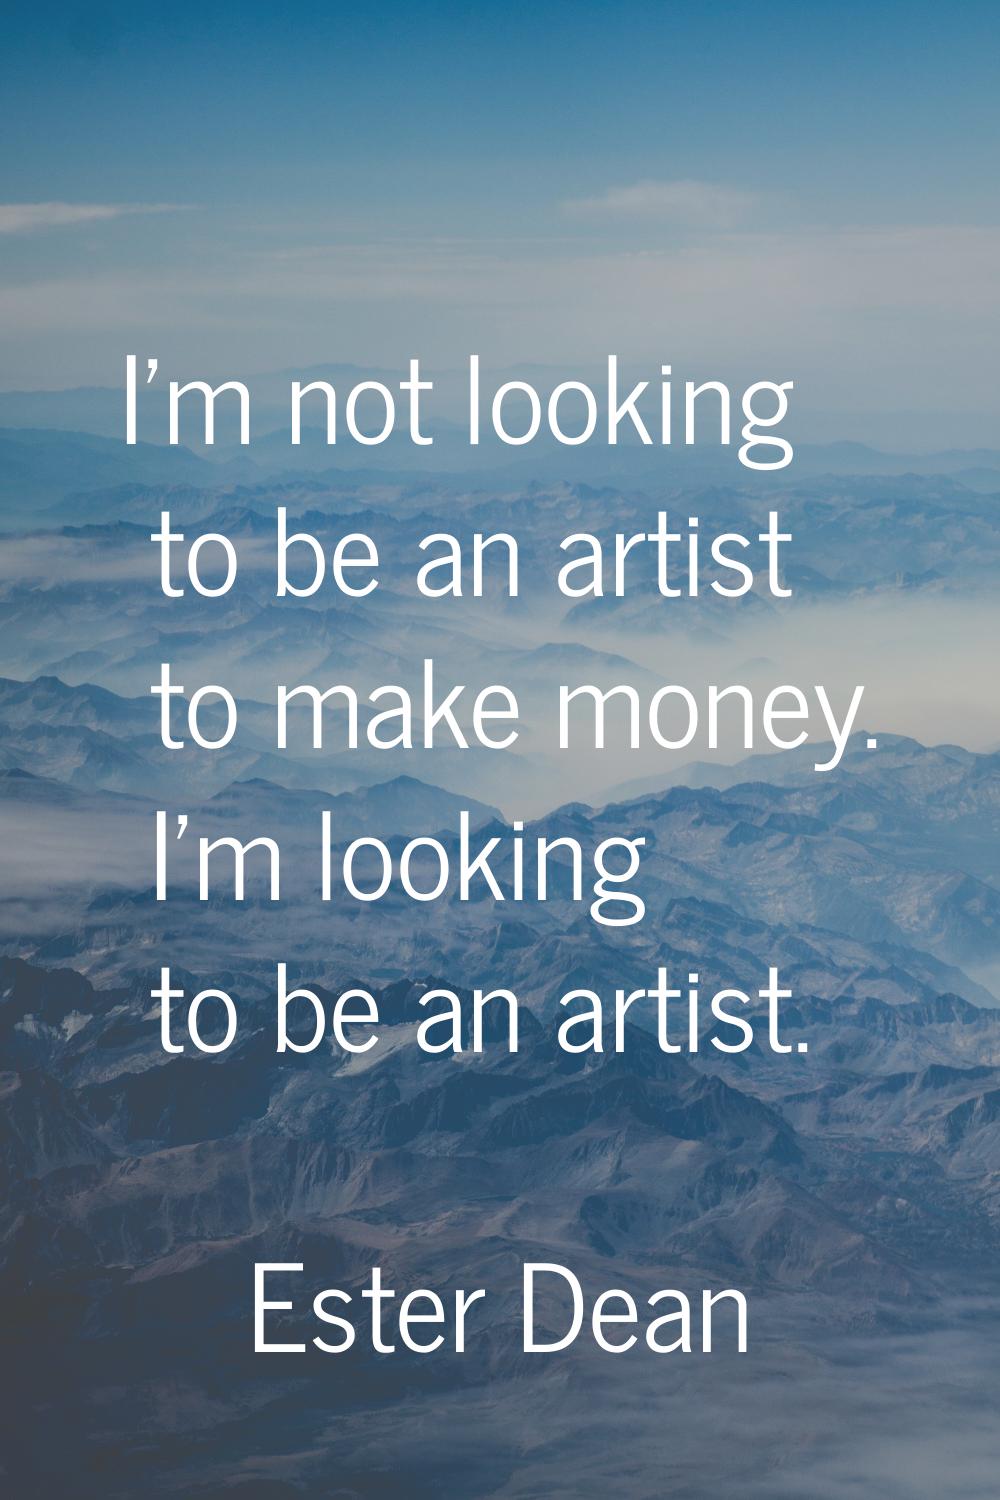 I'm not looking to be an artist to make money. I'm looking to be an artist.